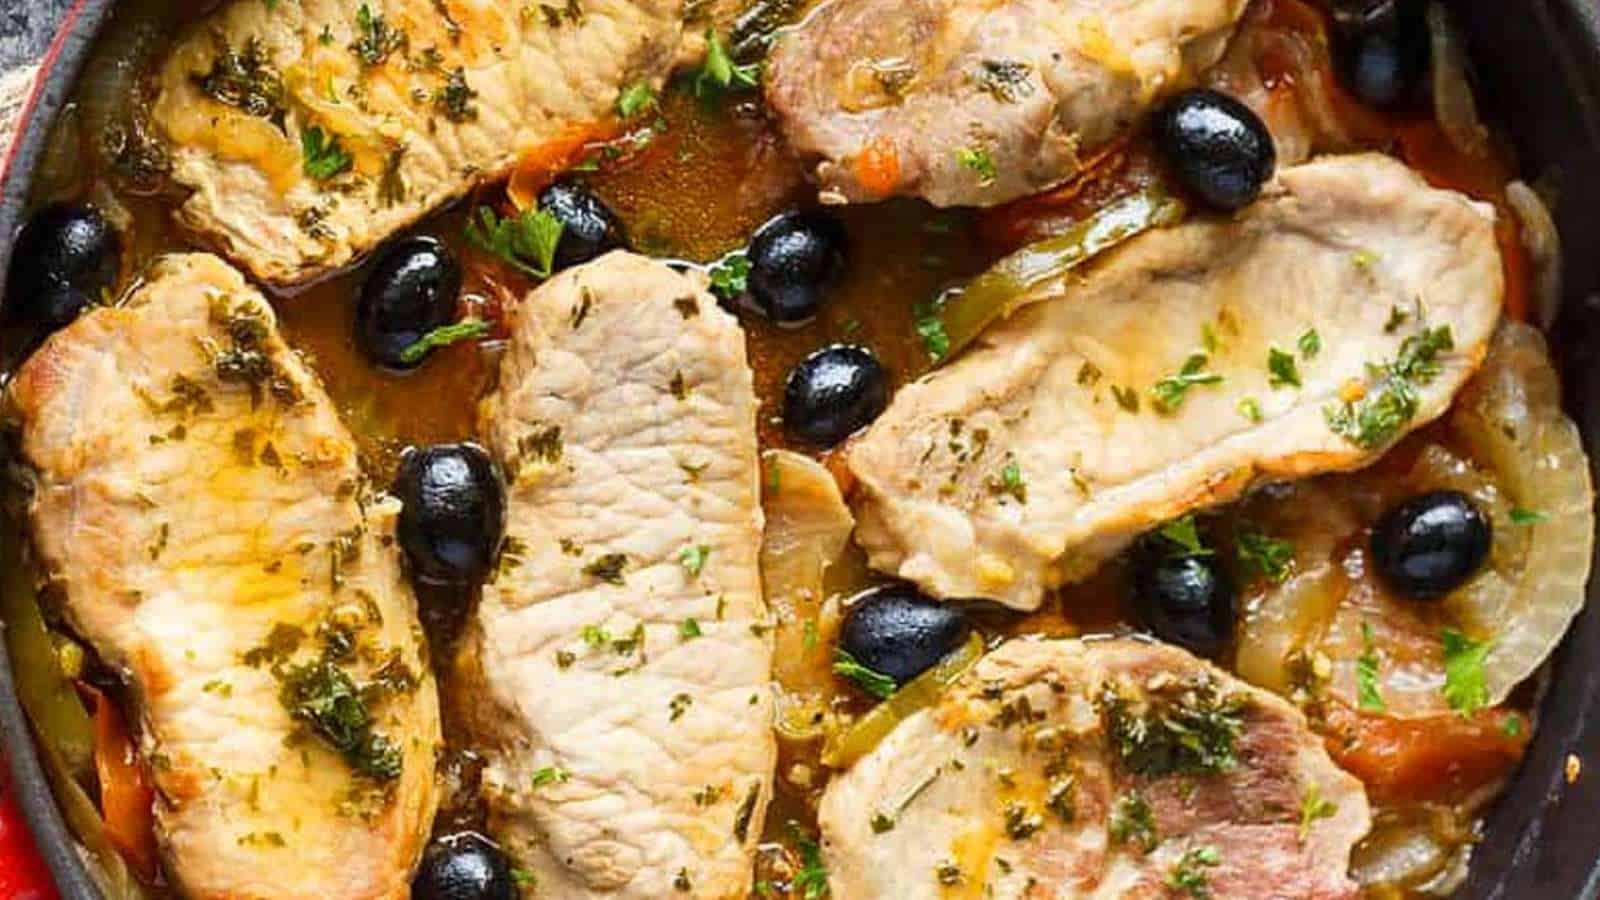 Pork chops with olives and tomatoes in a skillet.